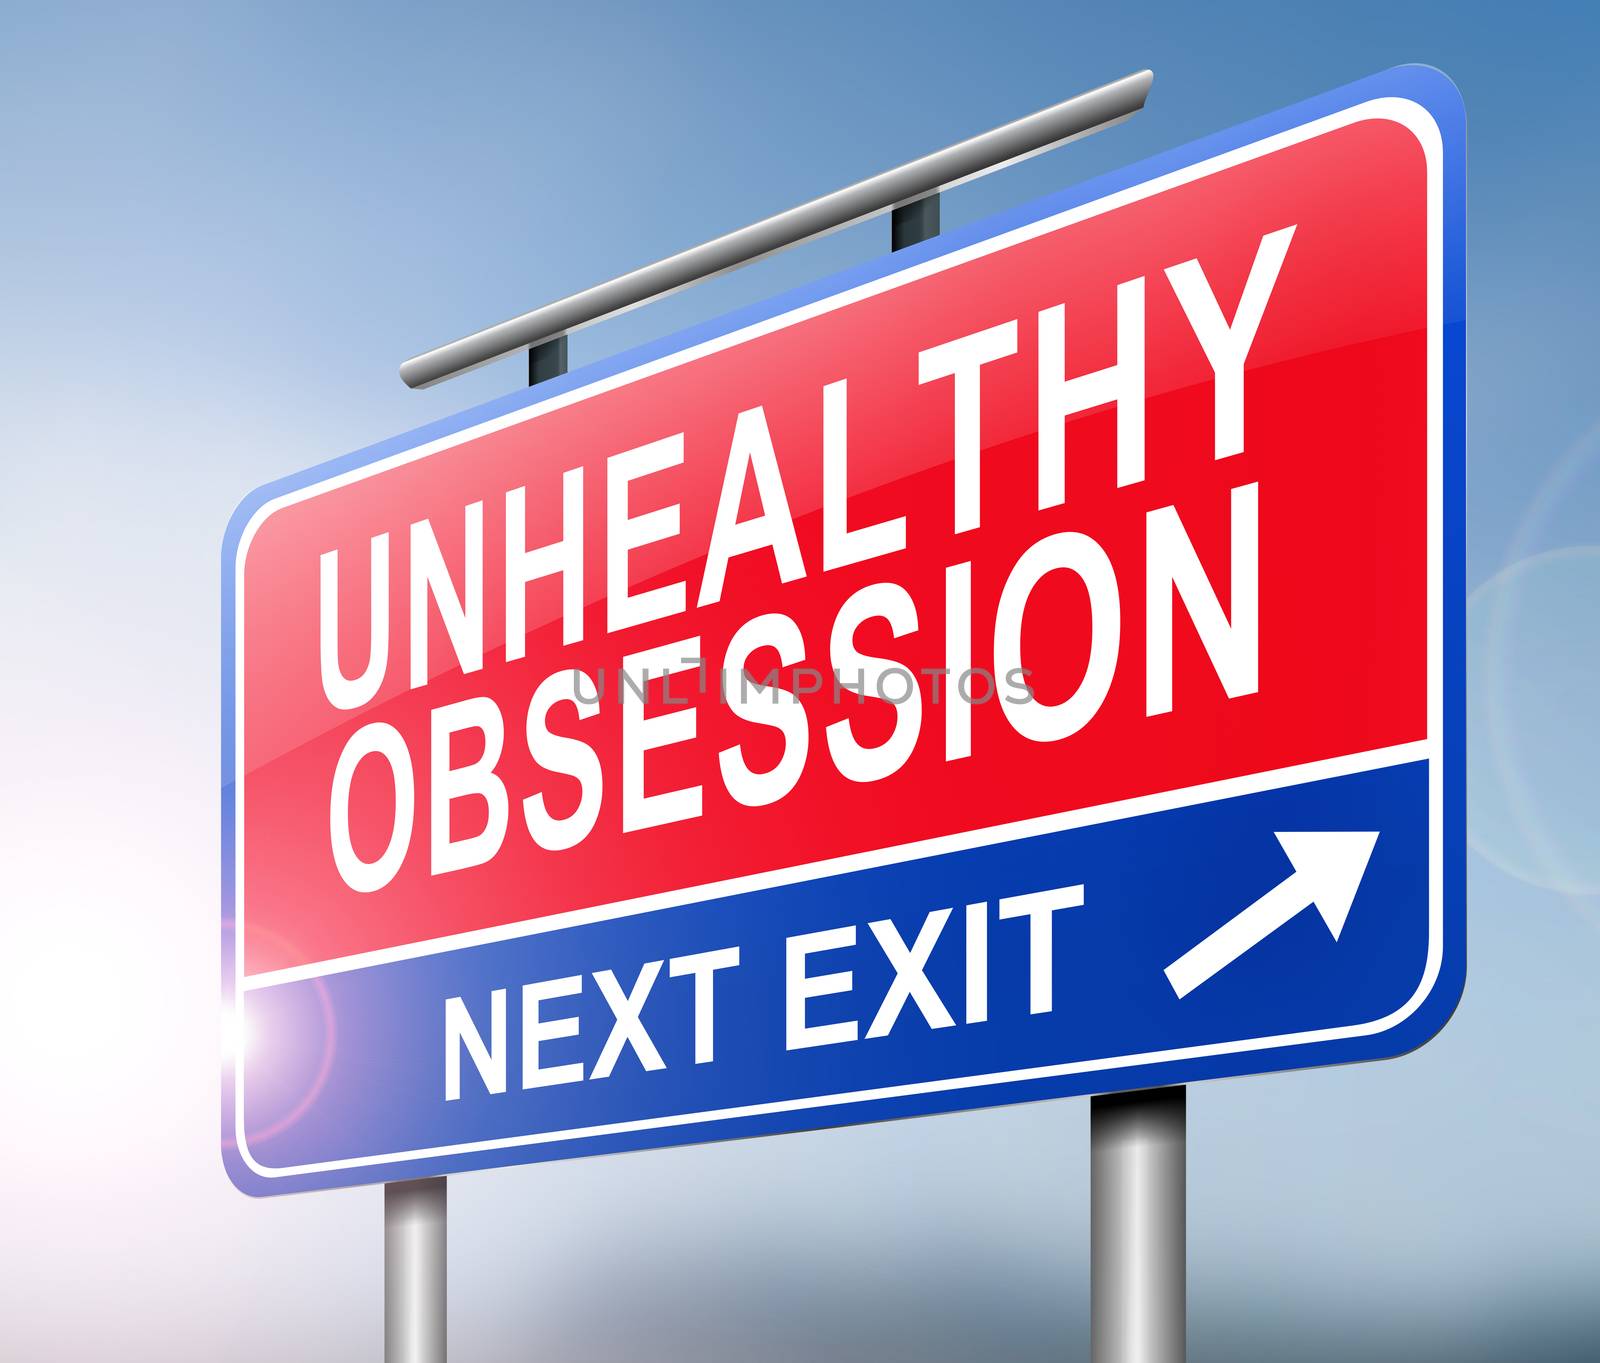 Illustration depicting a sign with an unhealthy obsession concept.